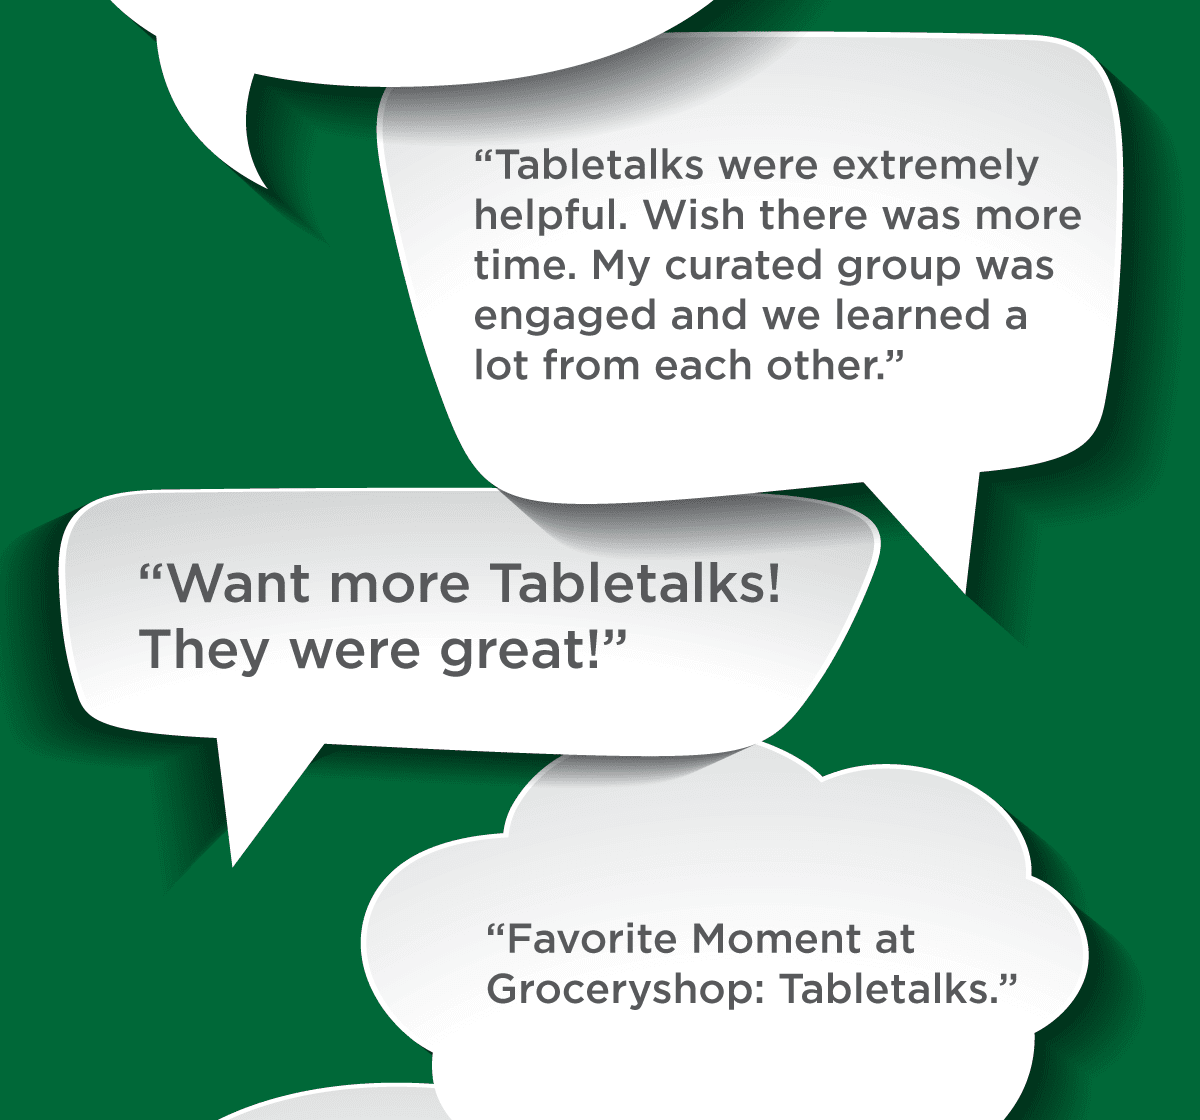 Tabletalks were extremely helpful. Wish there was more time. My curated group was engaged and we learned a lot from each other. -- Want more Tabletalks! They were great! -- Favorite Moment at Groceryshop: Tabletalks.